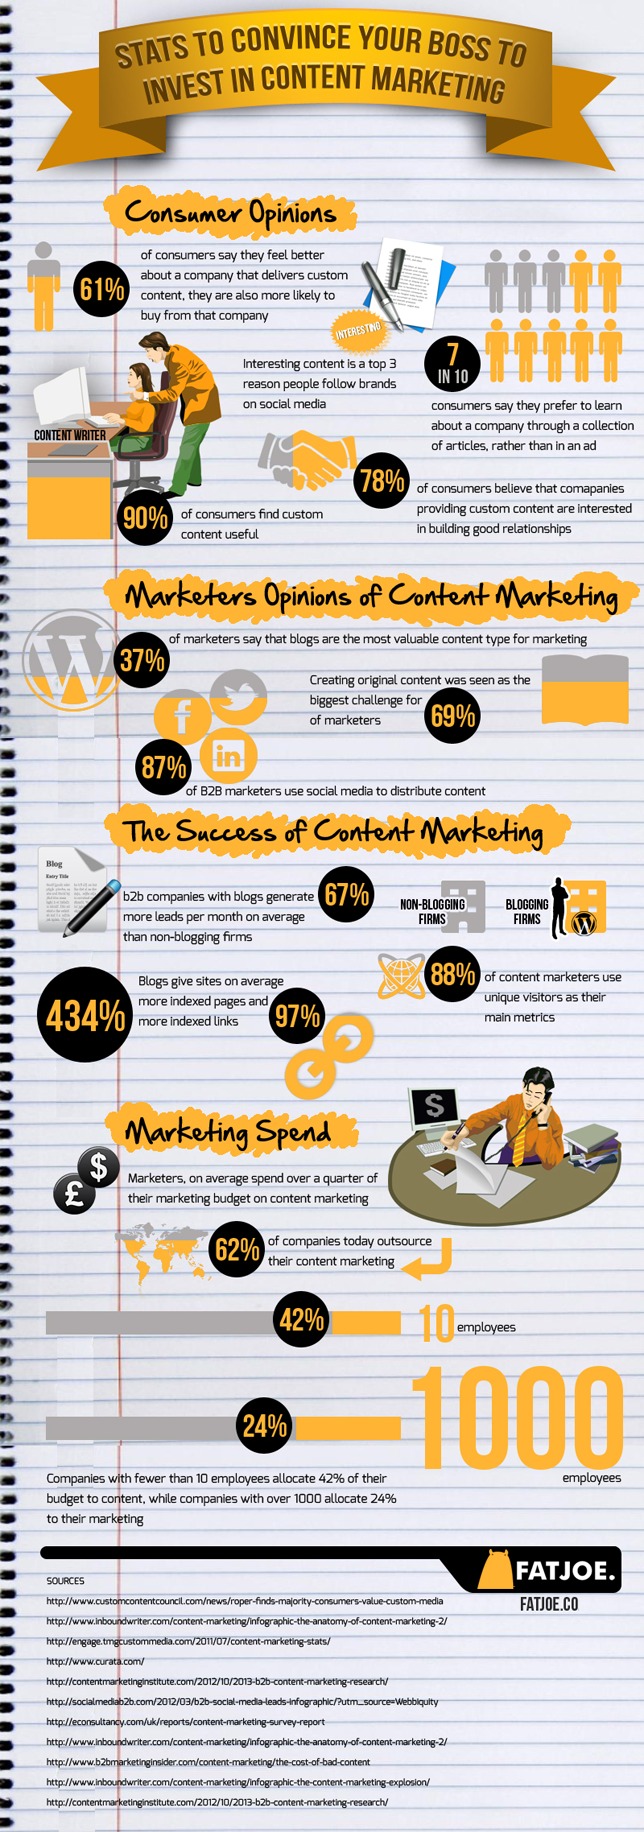 Stats-to-Convince-Your-Boss-to-Invest-in-Content-Marketing-1